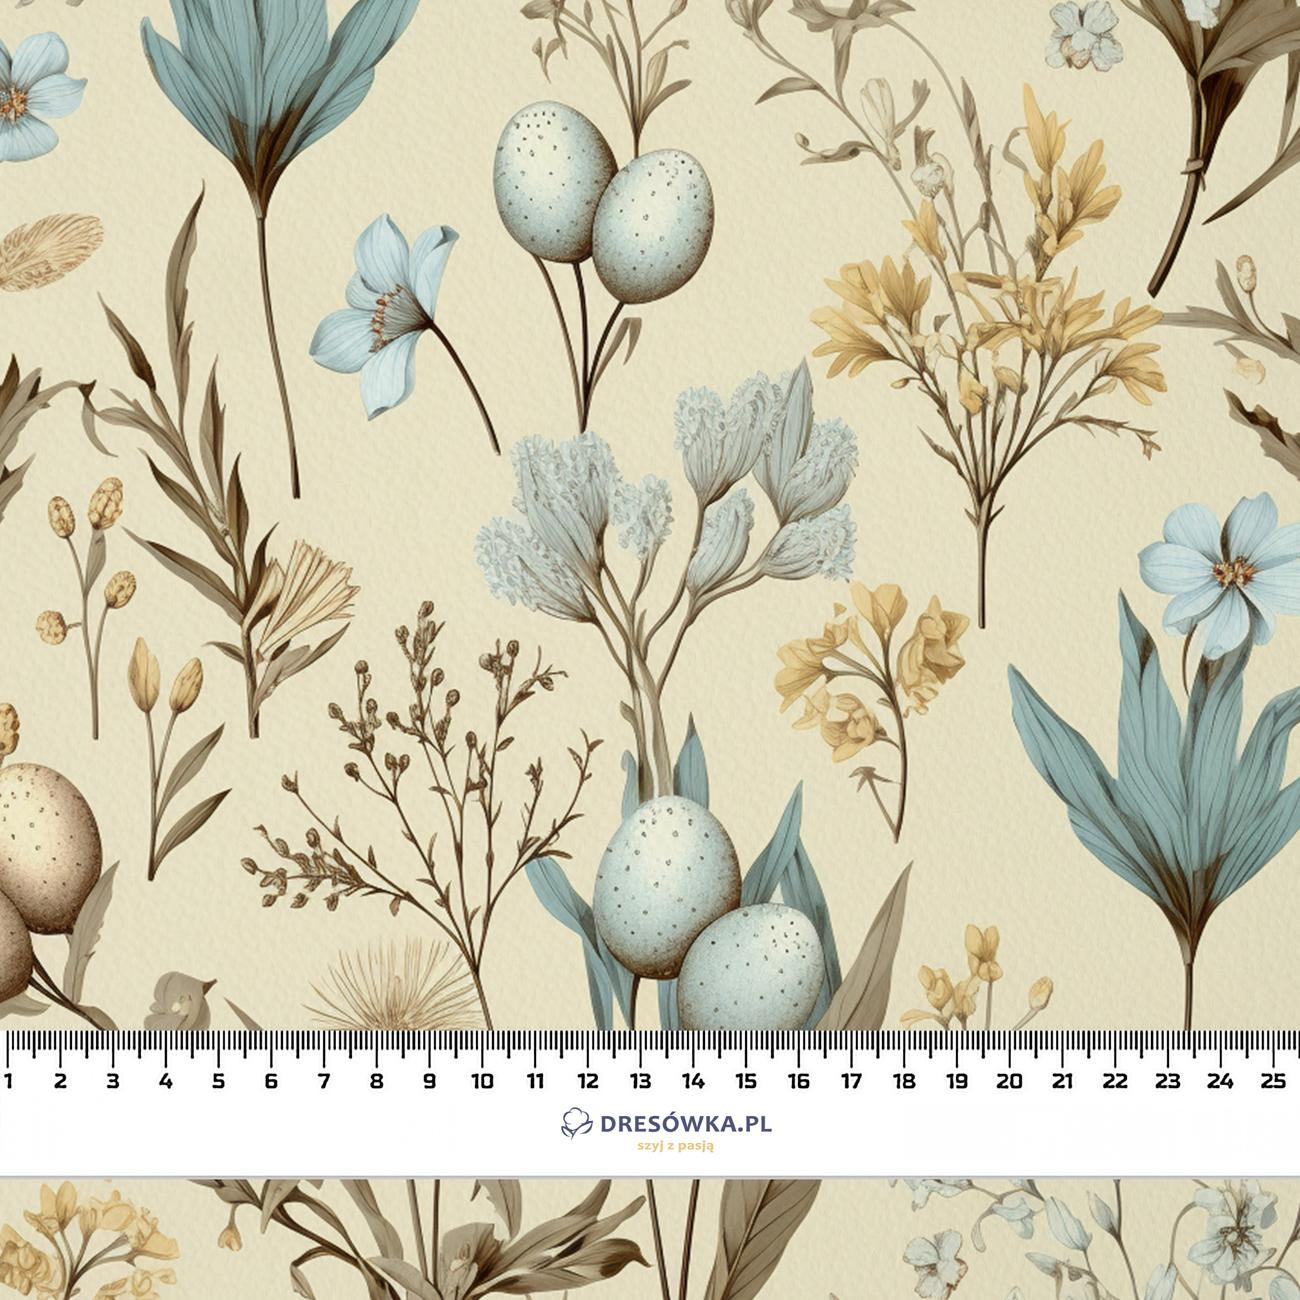 SPRING FLOWERS PAT. 4 - Cotton woven fabric